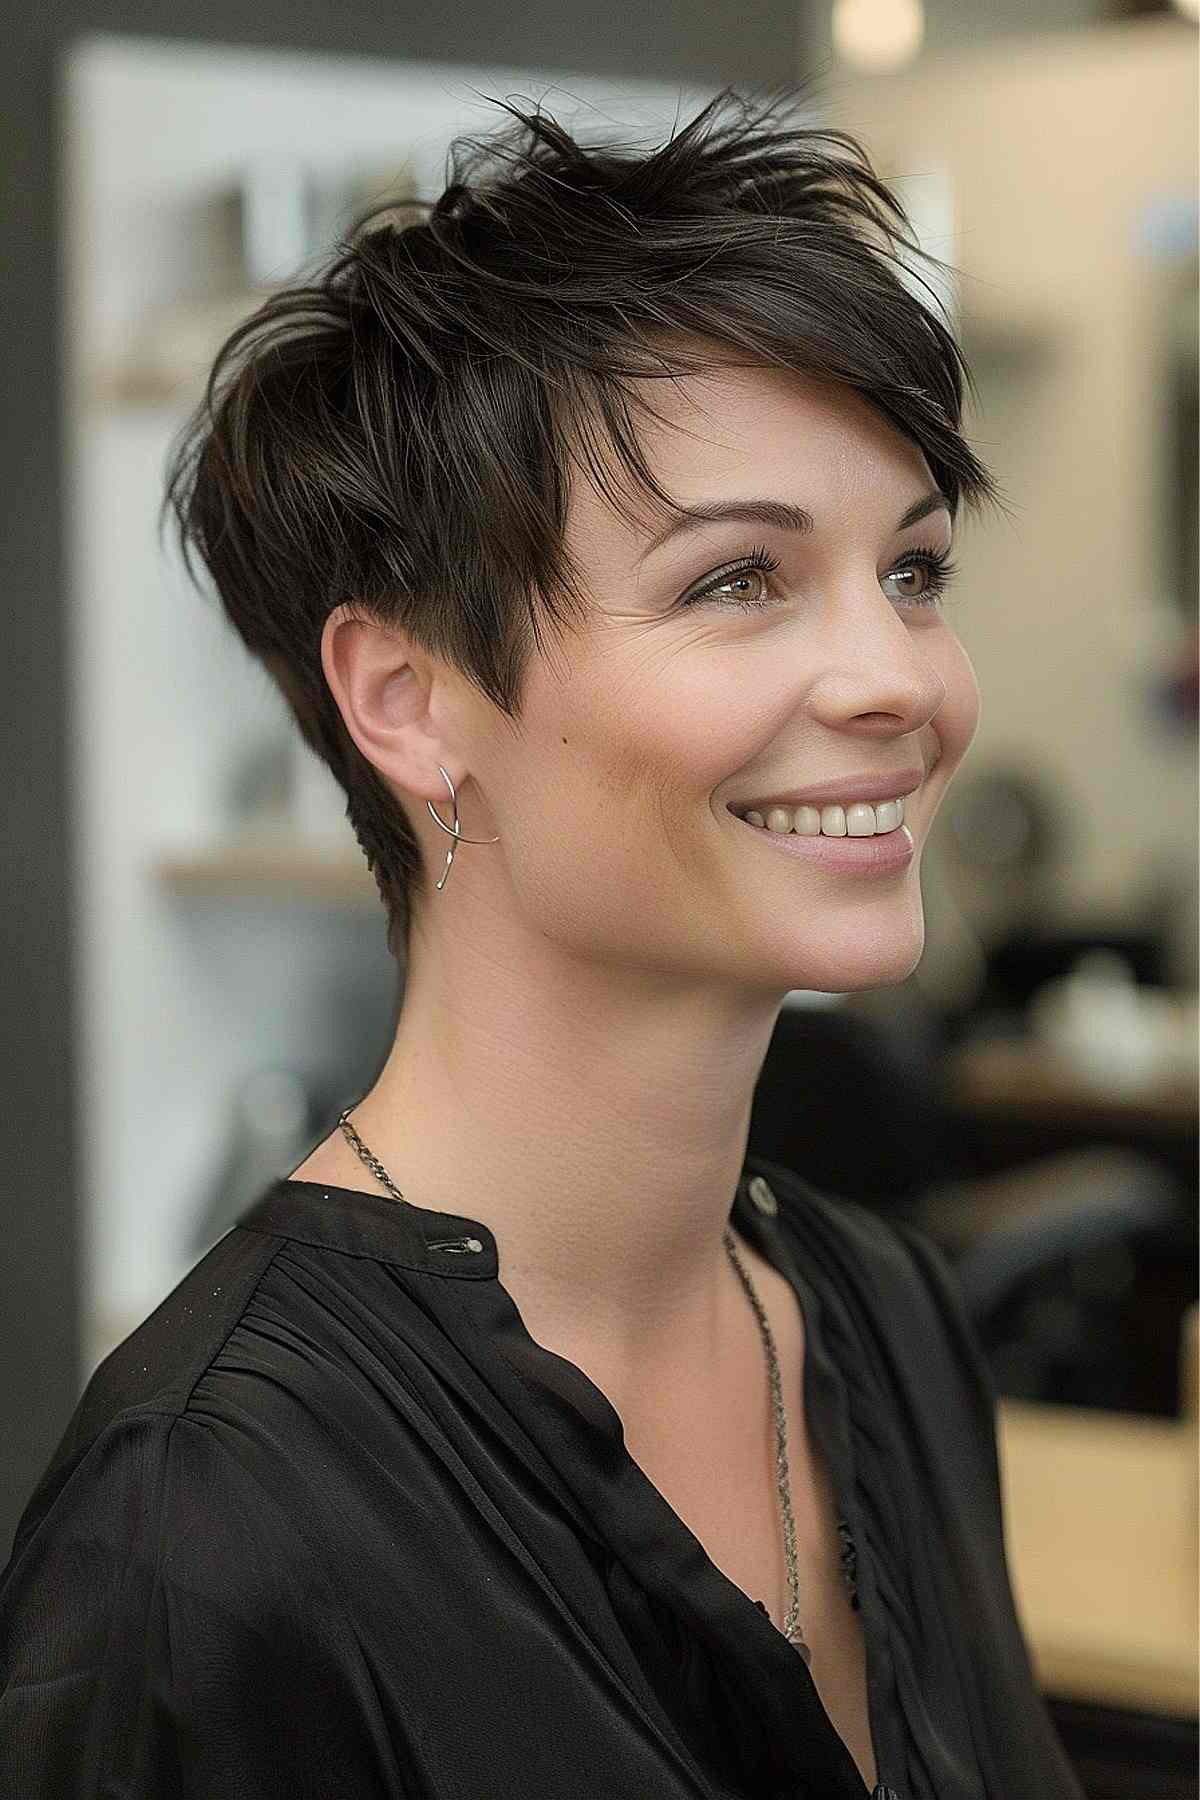 Woman with a textured feathered pixie cut, showing volume at the crown and tapered at the neck, ideal for active lifestyles.